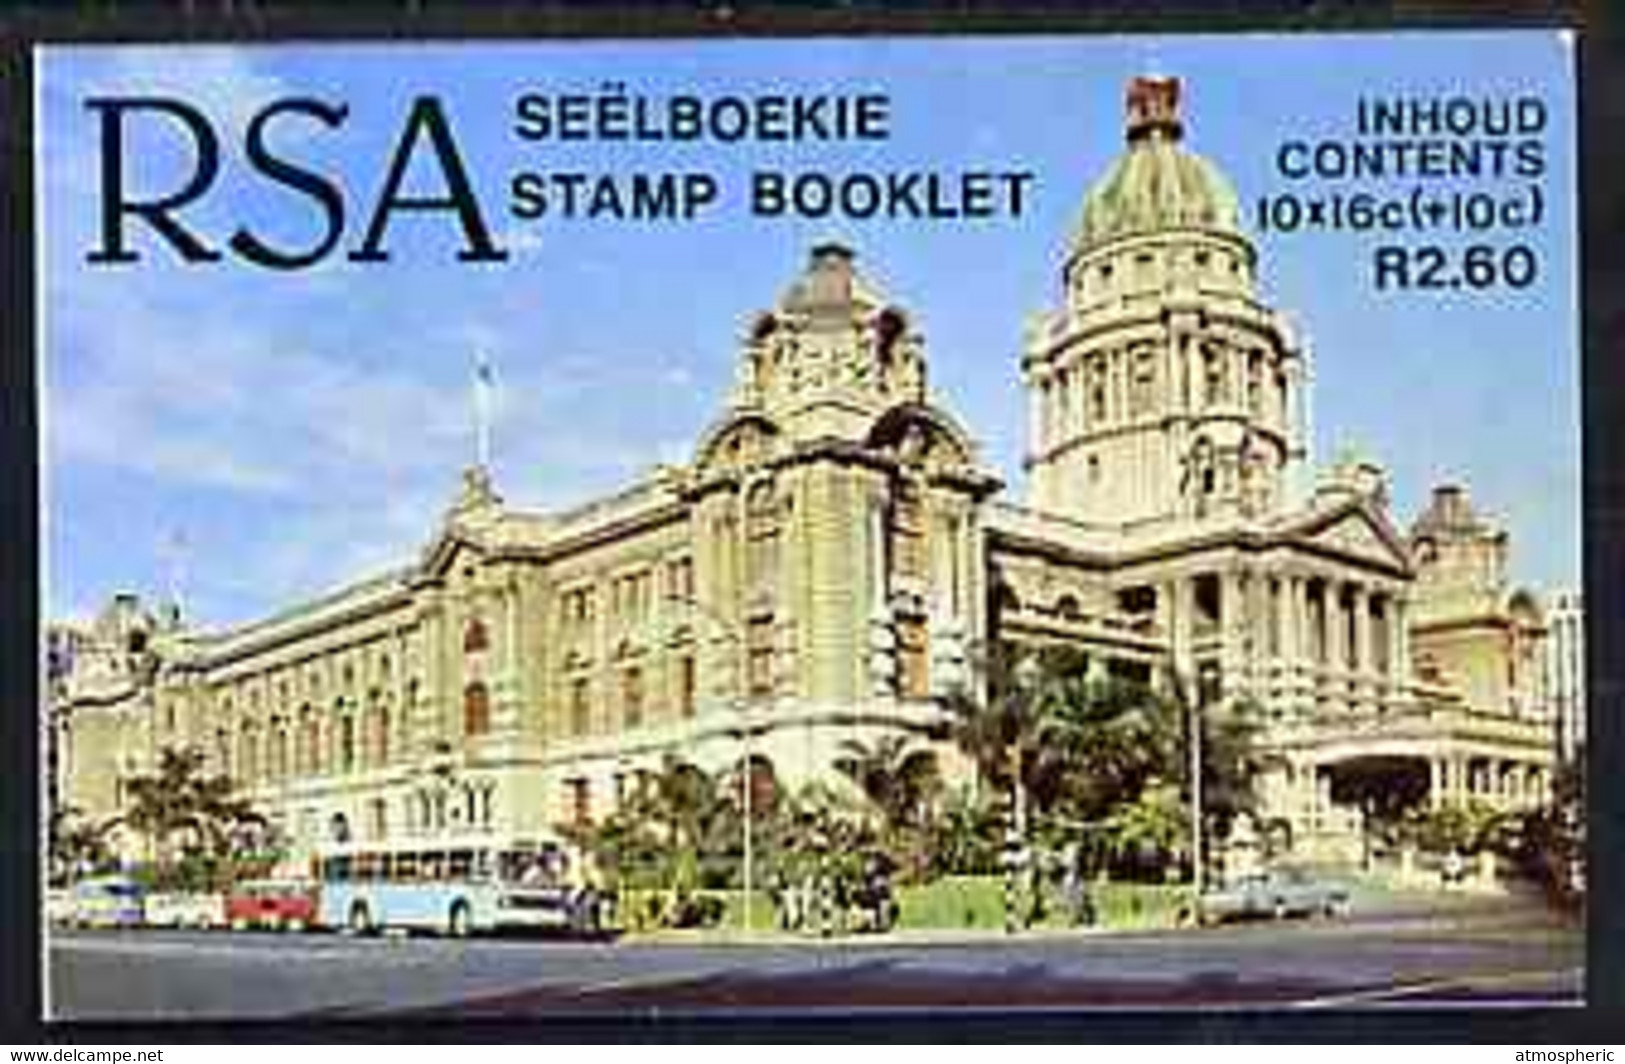 Booklet - South Africa 1987-88 National Flood Relief Fund #1 (City Hall) 2r60 Booklet Complete And Pristine, SG SB20 - Carnets